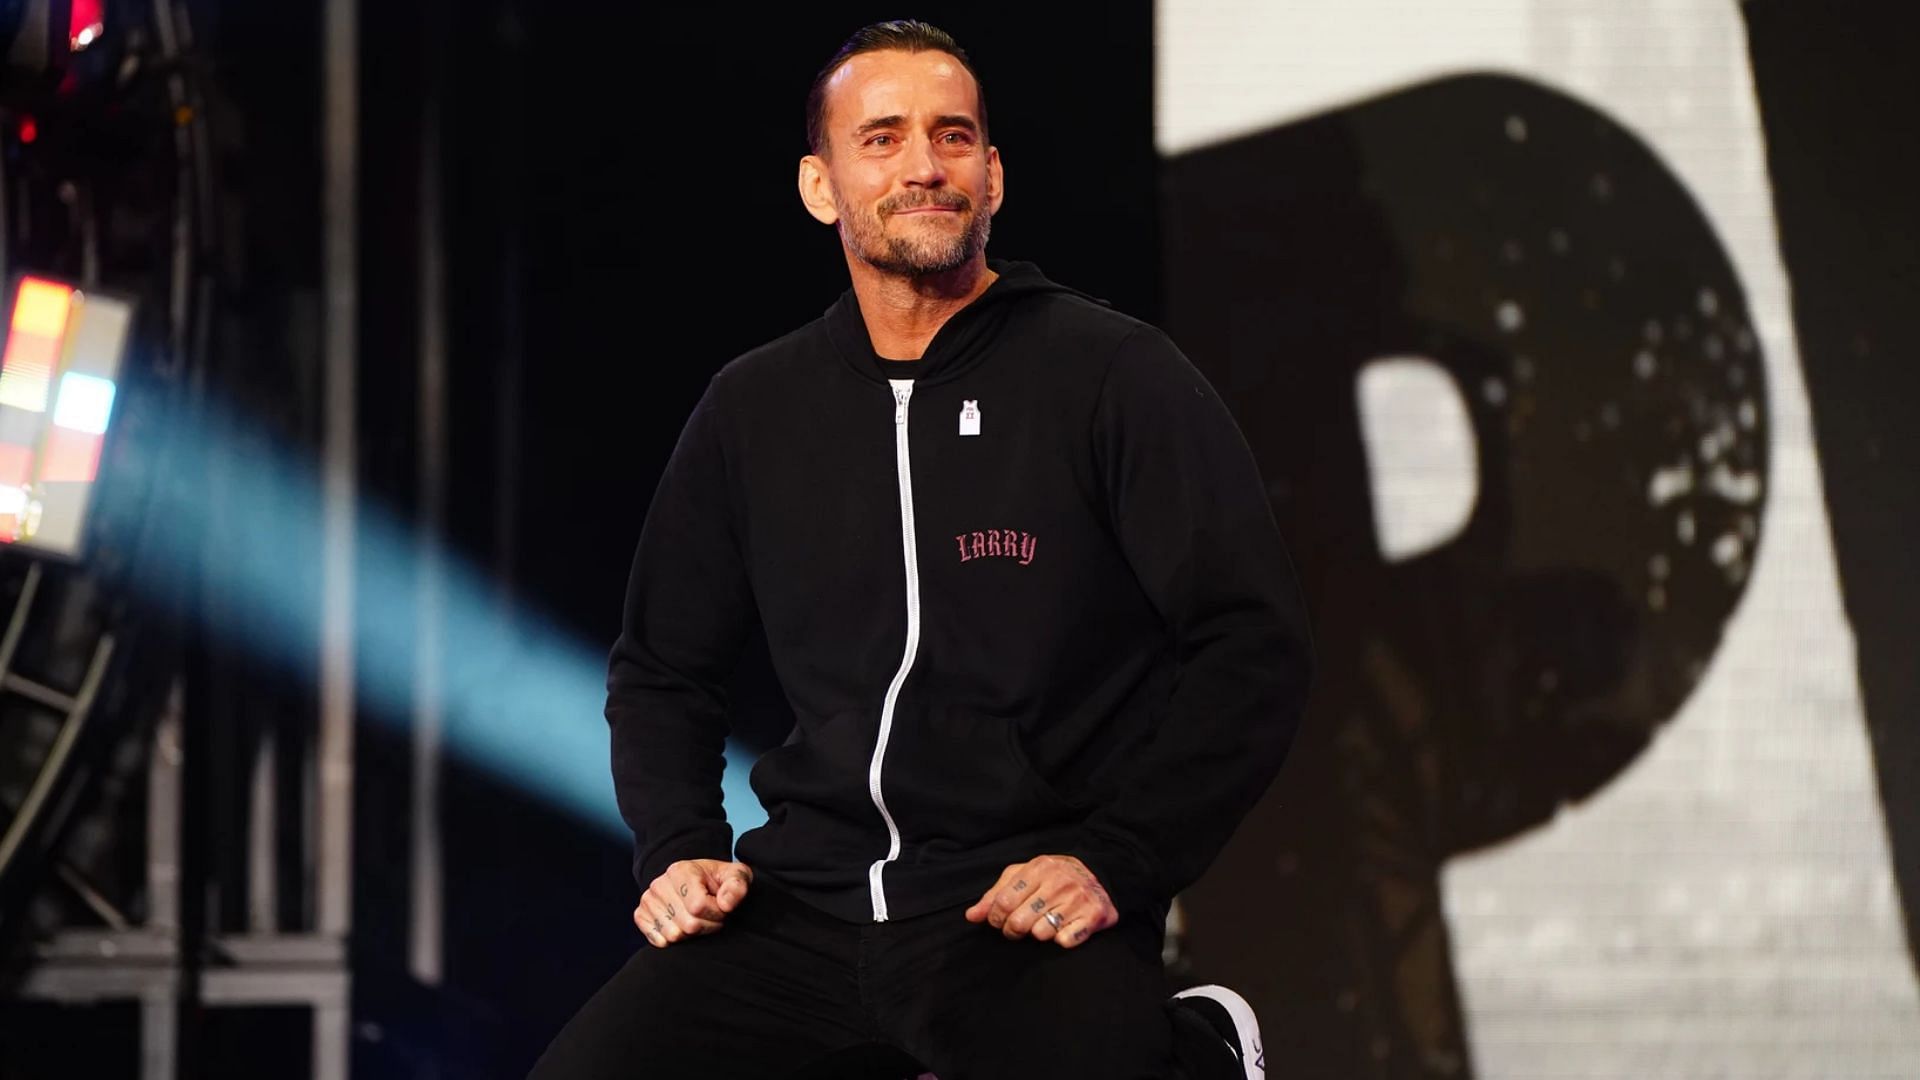 CM Punk during his return to pro wrestling back in 2019.